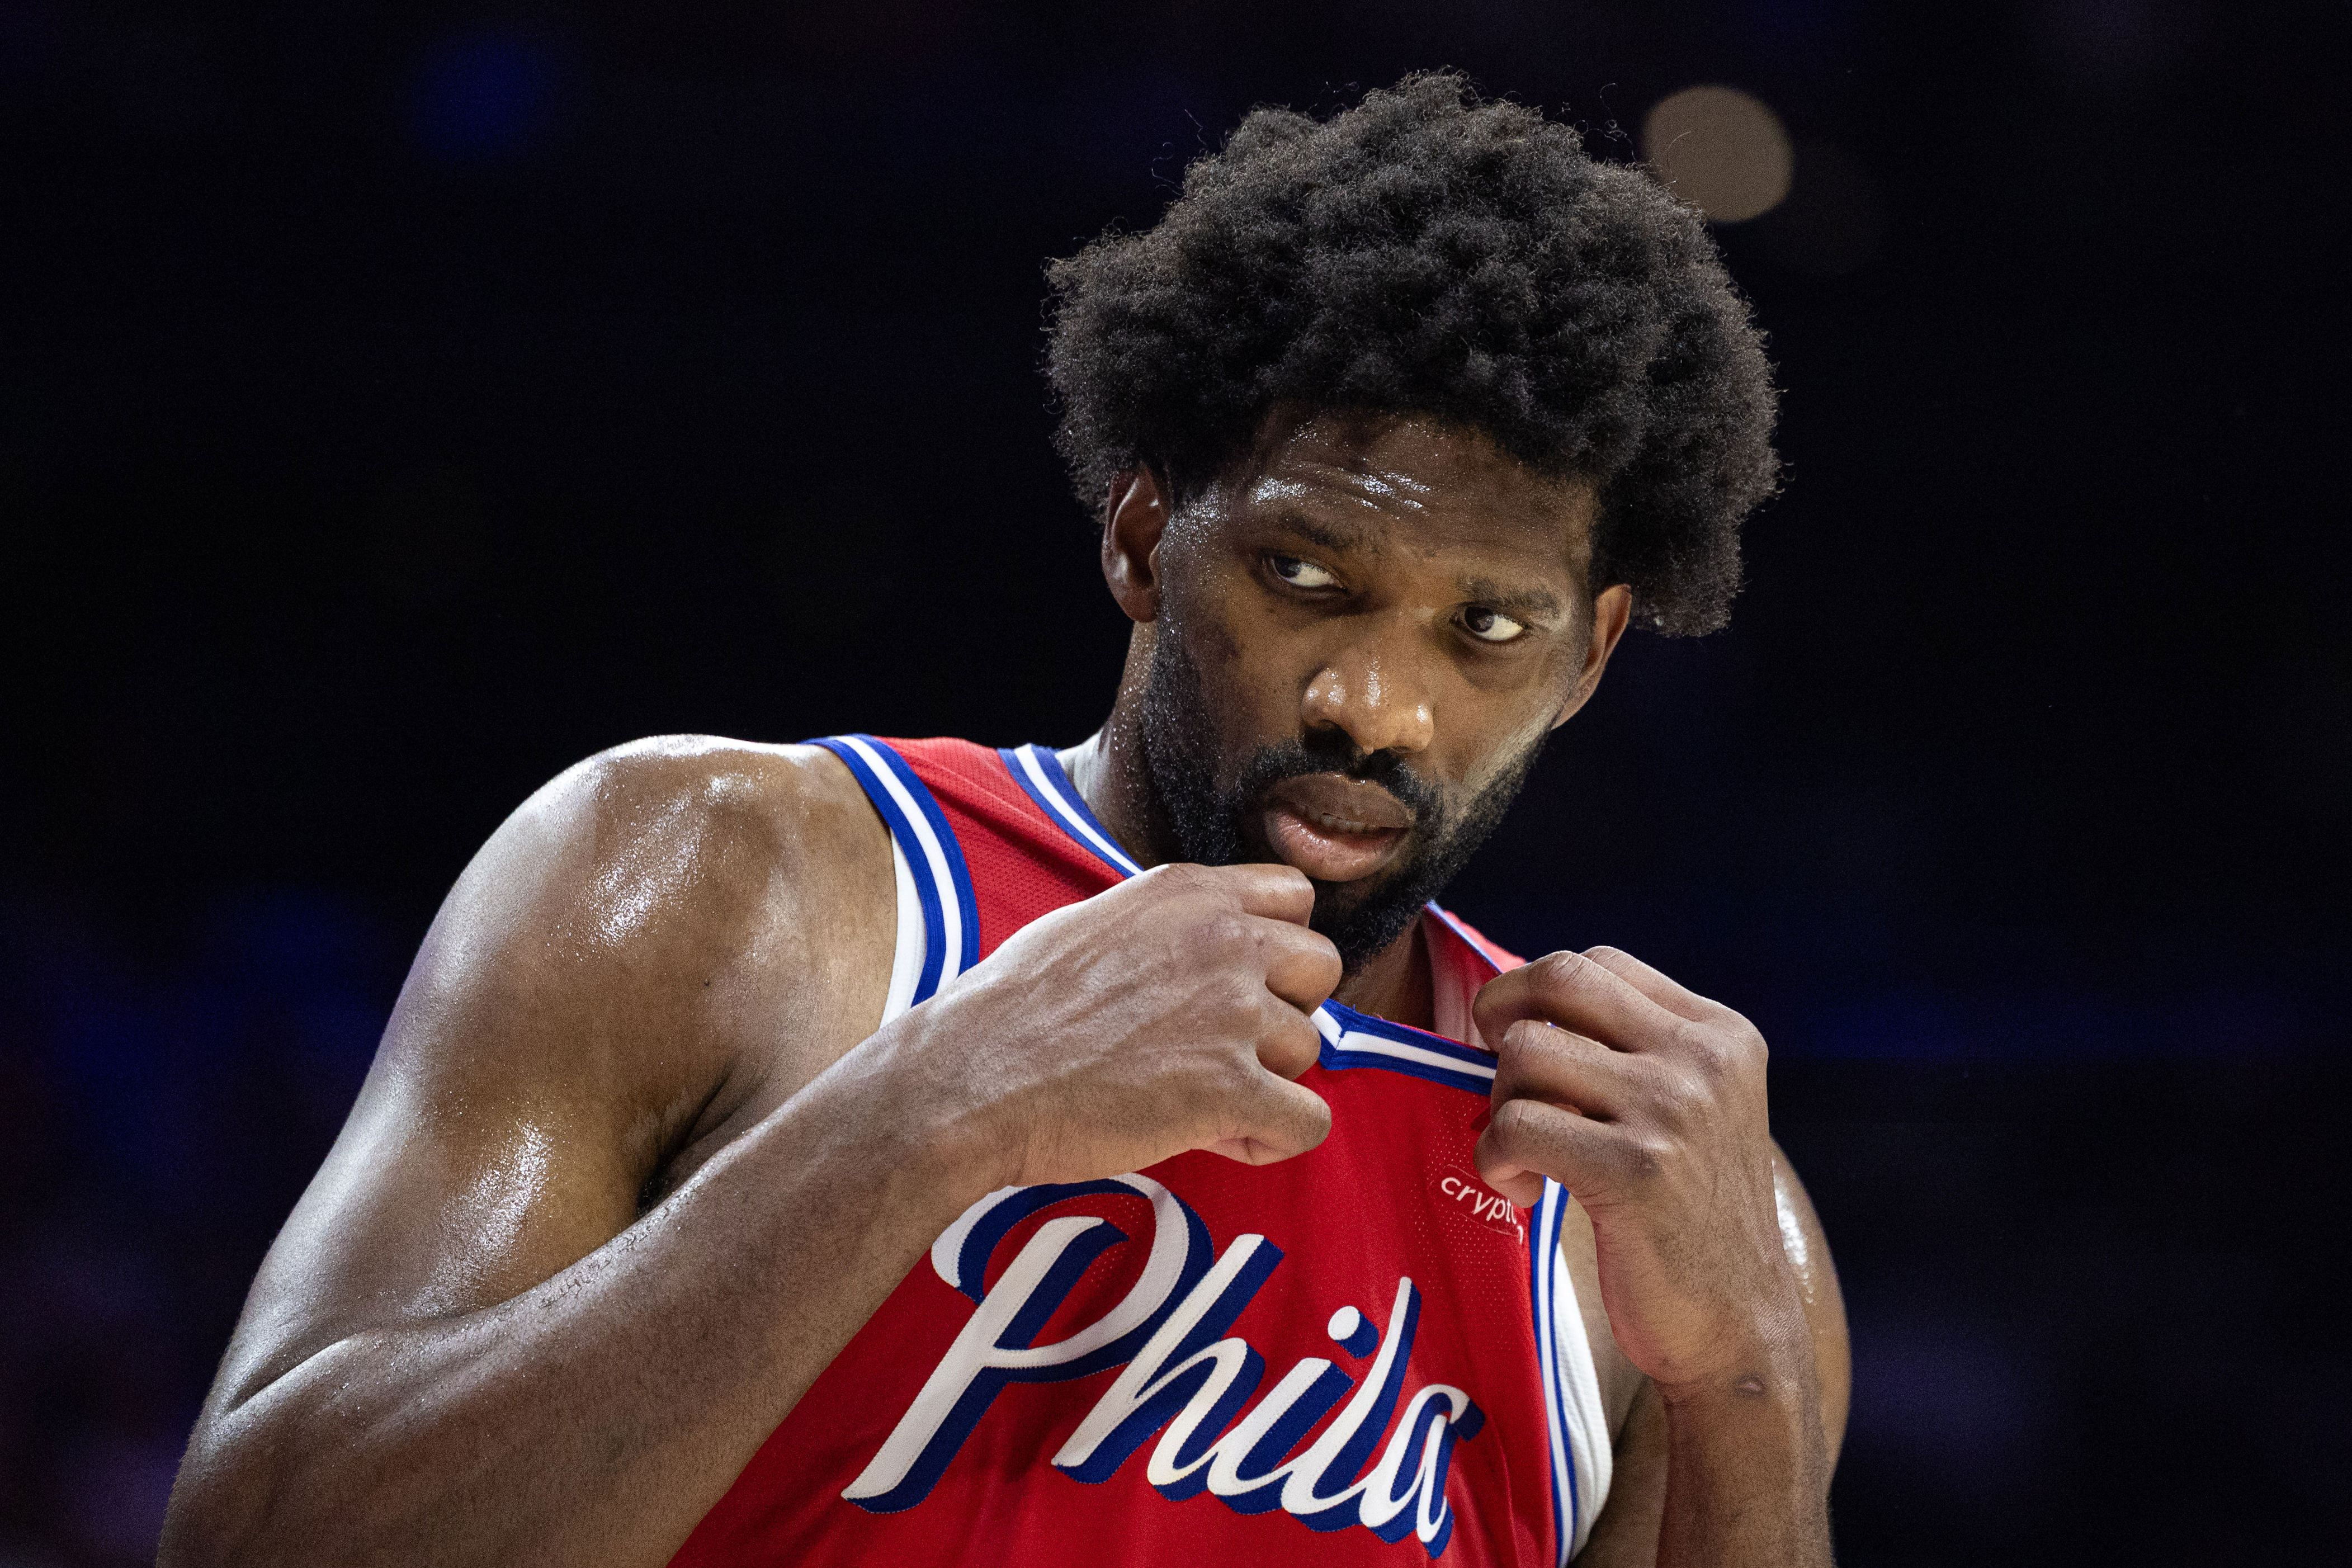 joel embiid calls philadelphia 76ers fan support at wells fargo center ‘disappointing’ in playoff loss to knicks